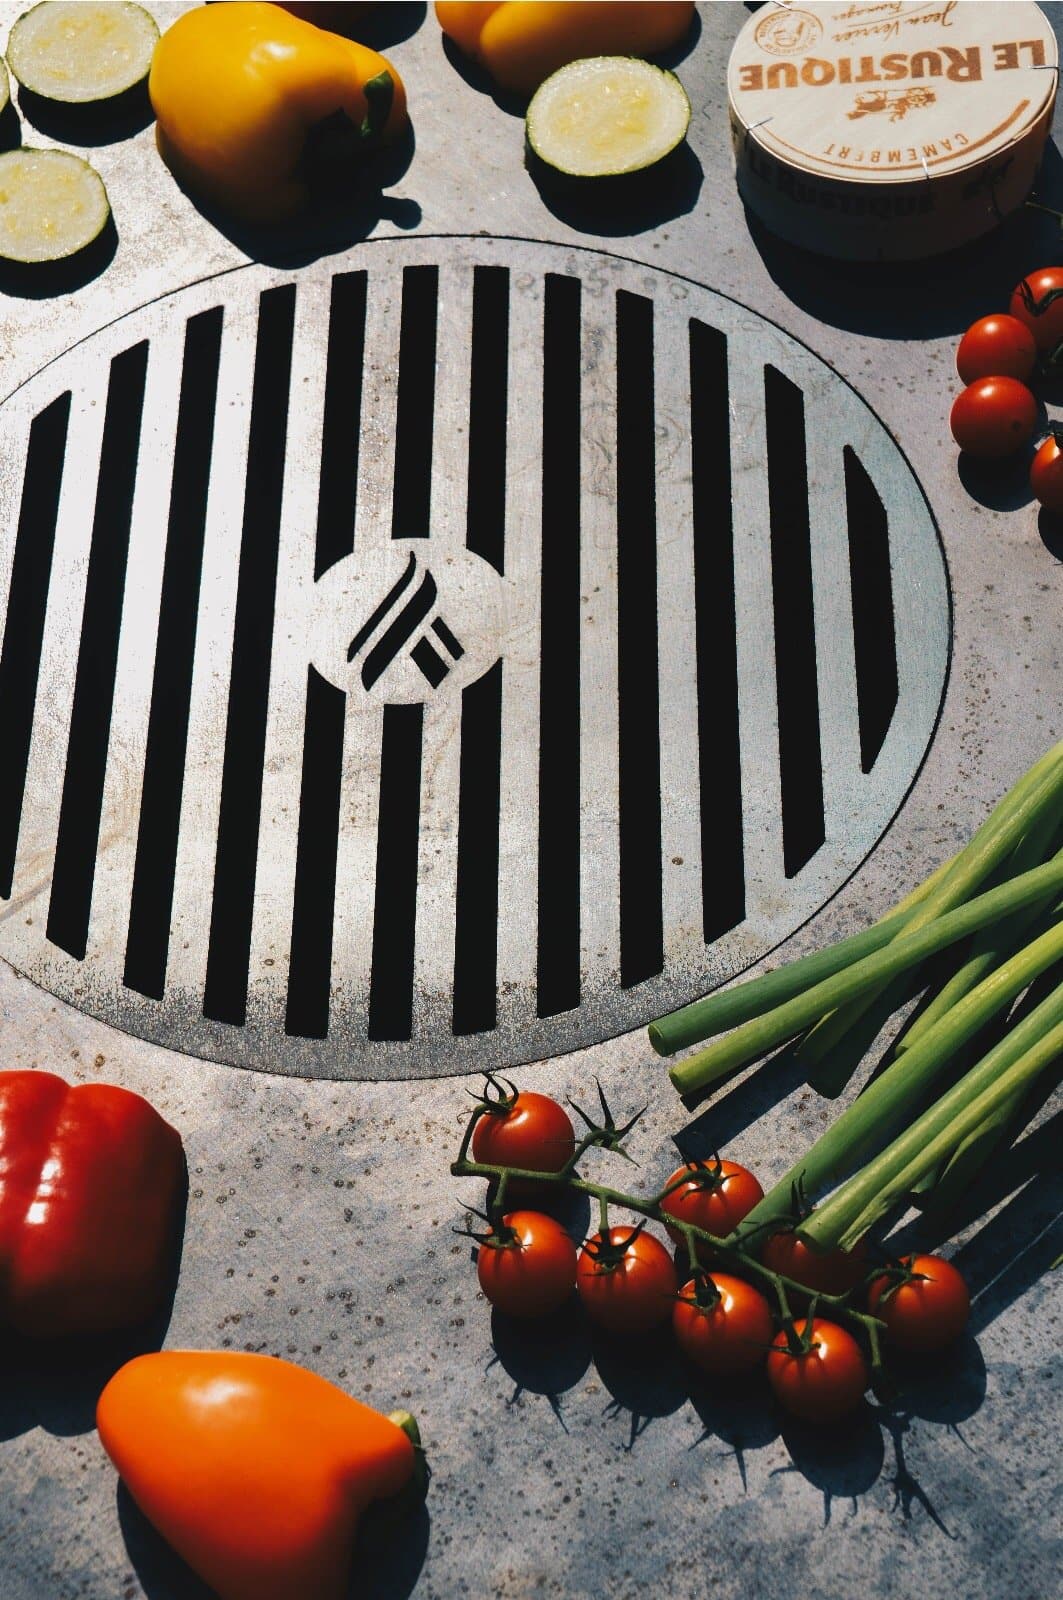 Arteflame Carbon Steel Grill Grate in use